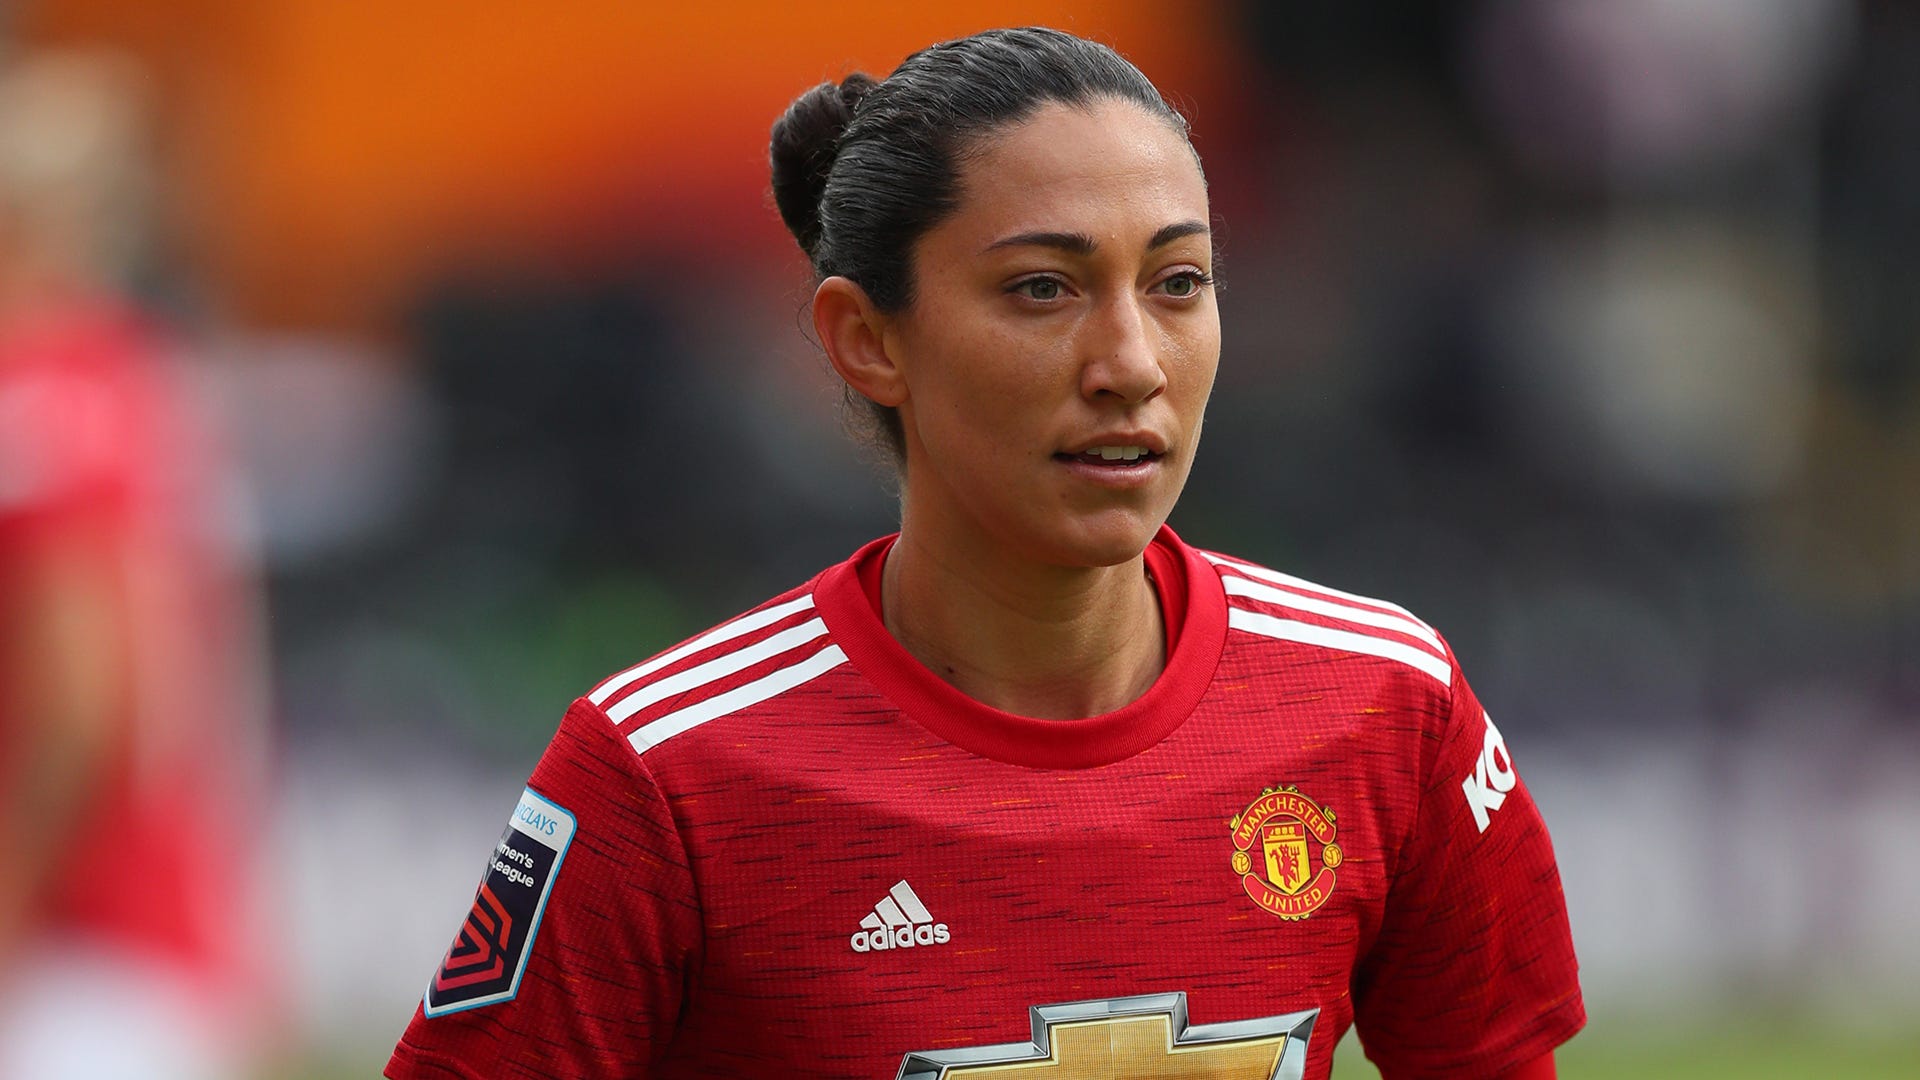 It was a special day' - USWNT star Press on playing at Old Trafford for Man  Utd